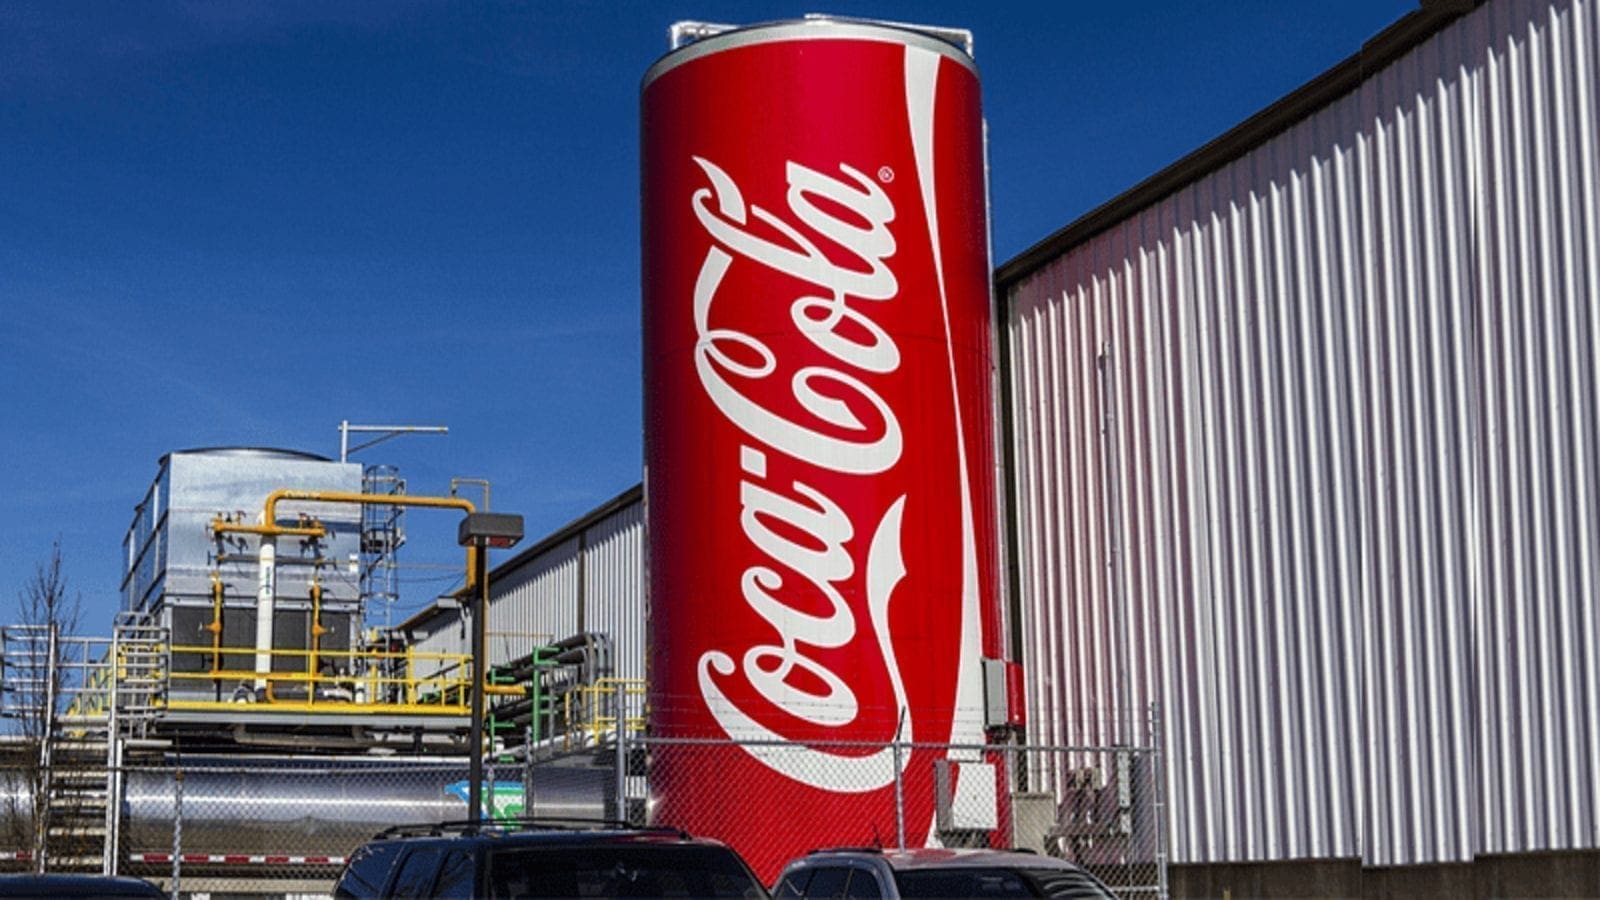 Coca-Cola Beverages Vietnam plans to inject US$136m into construction of its largest factory in Vietnam